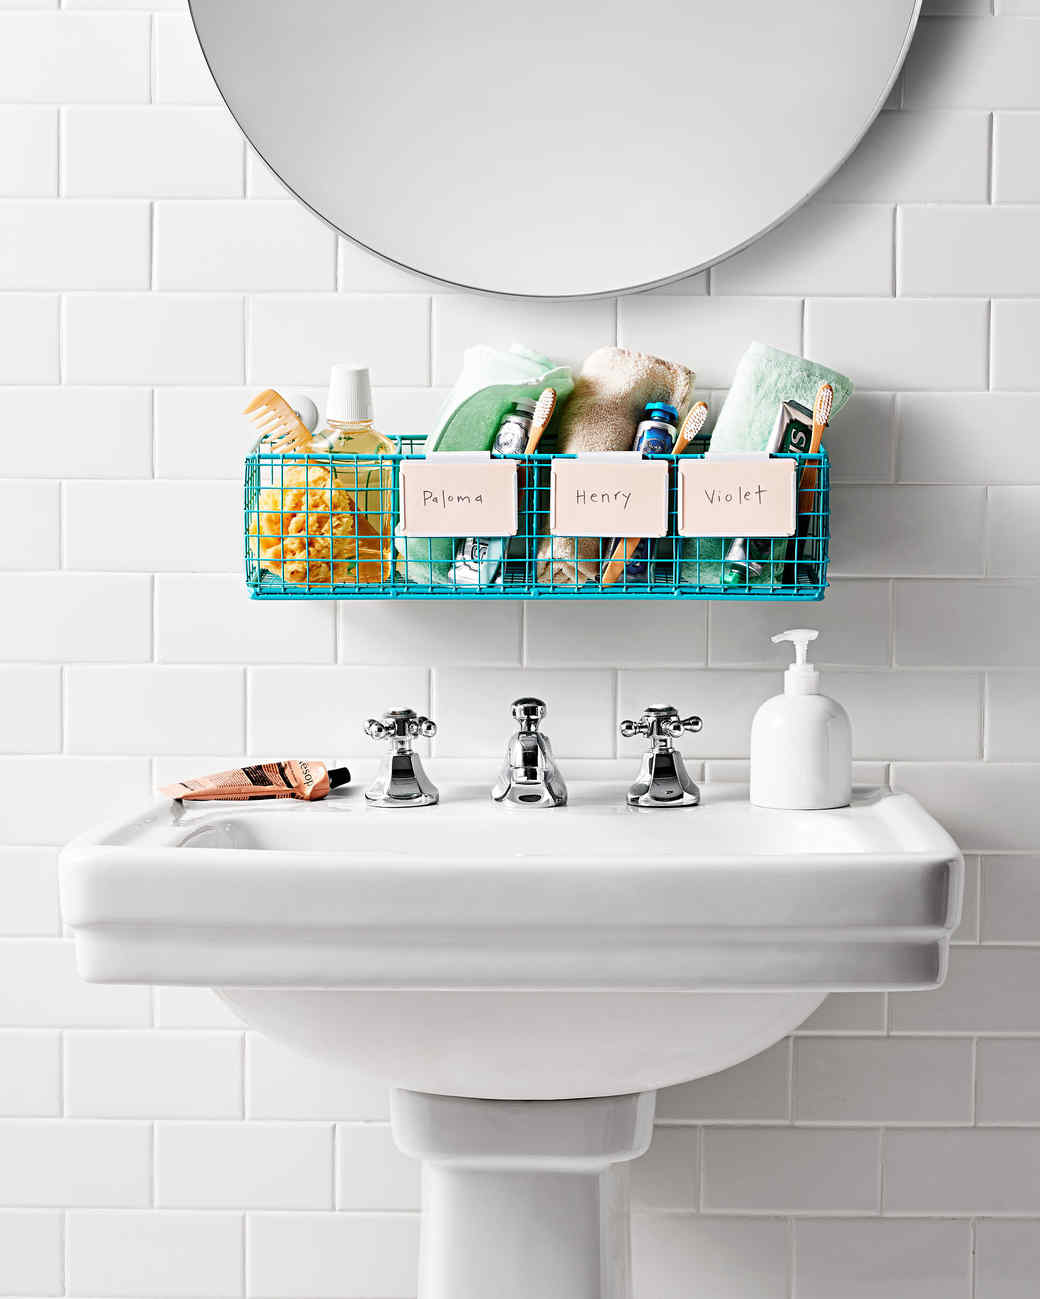 How to declutter and keep your bathroom organized - Bath Fitter